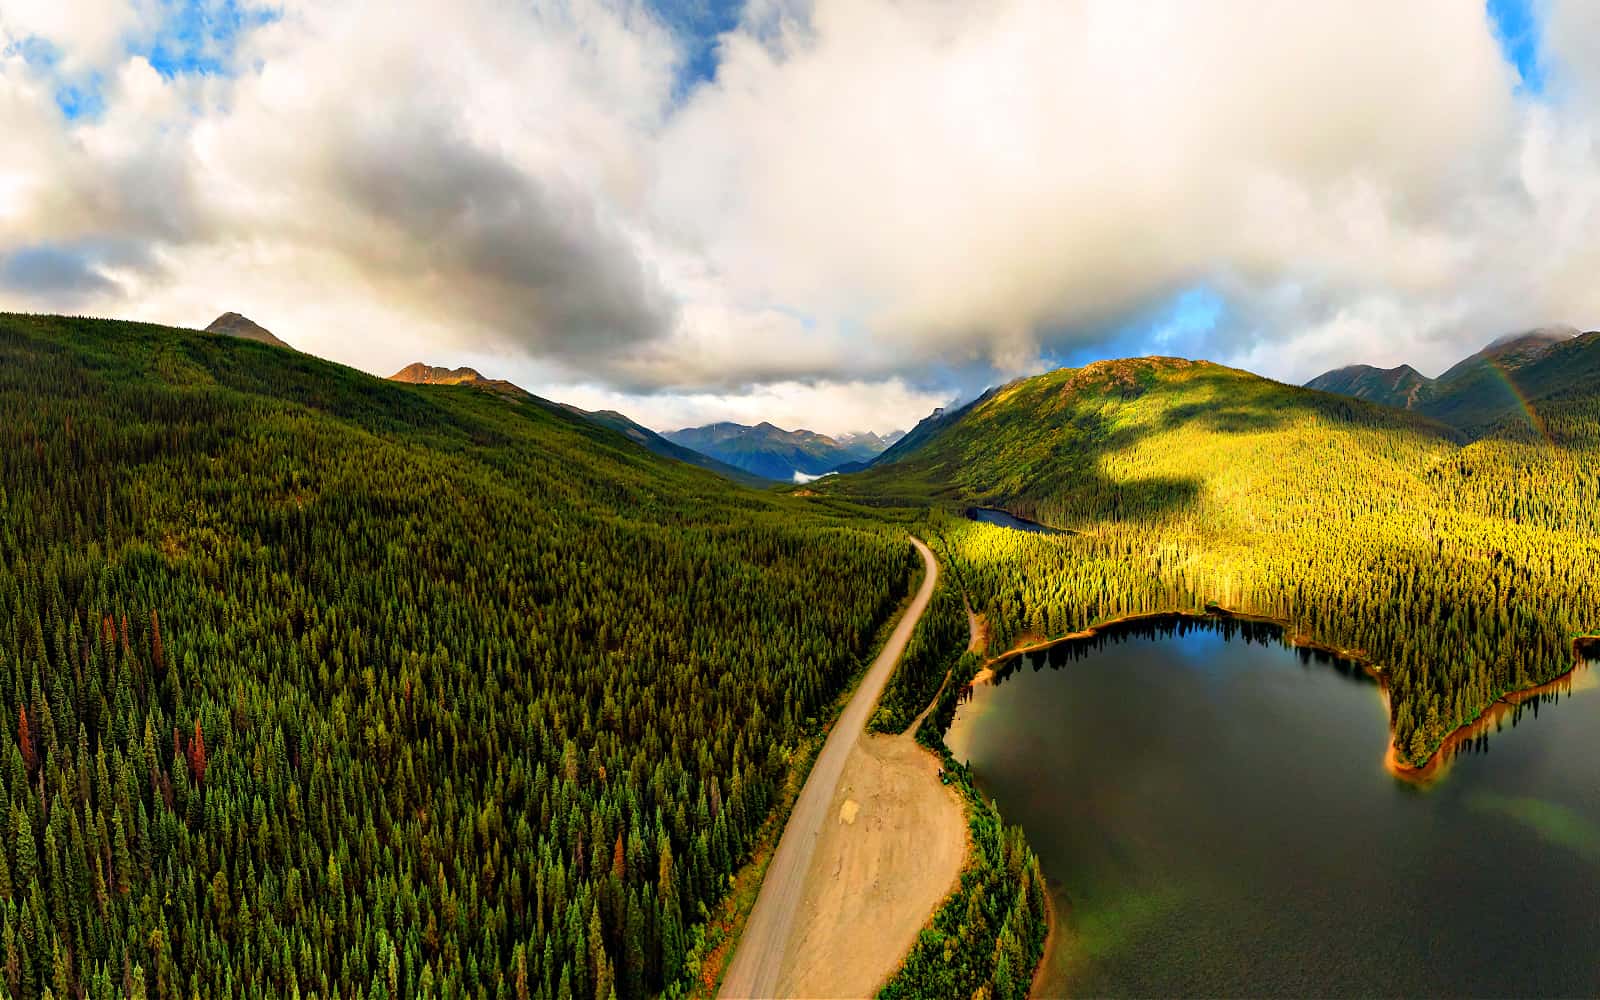 Panoramic View of Scenic Road alongside Peaceful Lake surrounded by Mountains in Canadian Nature. Aerial Drone Shot. Taken near Stewart-Cassiar Highway, Northern British Columbia, Canada.